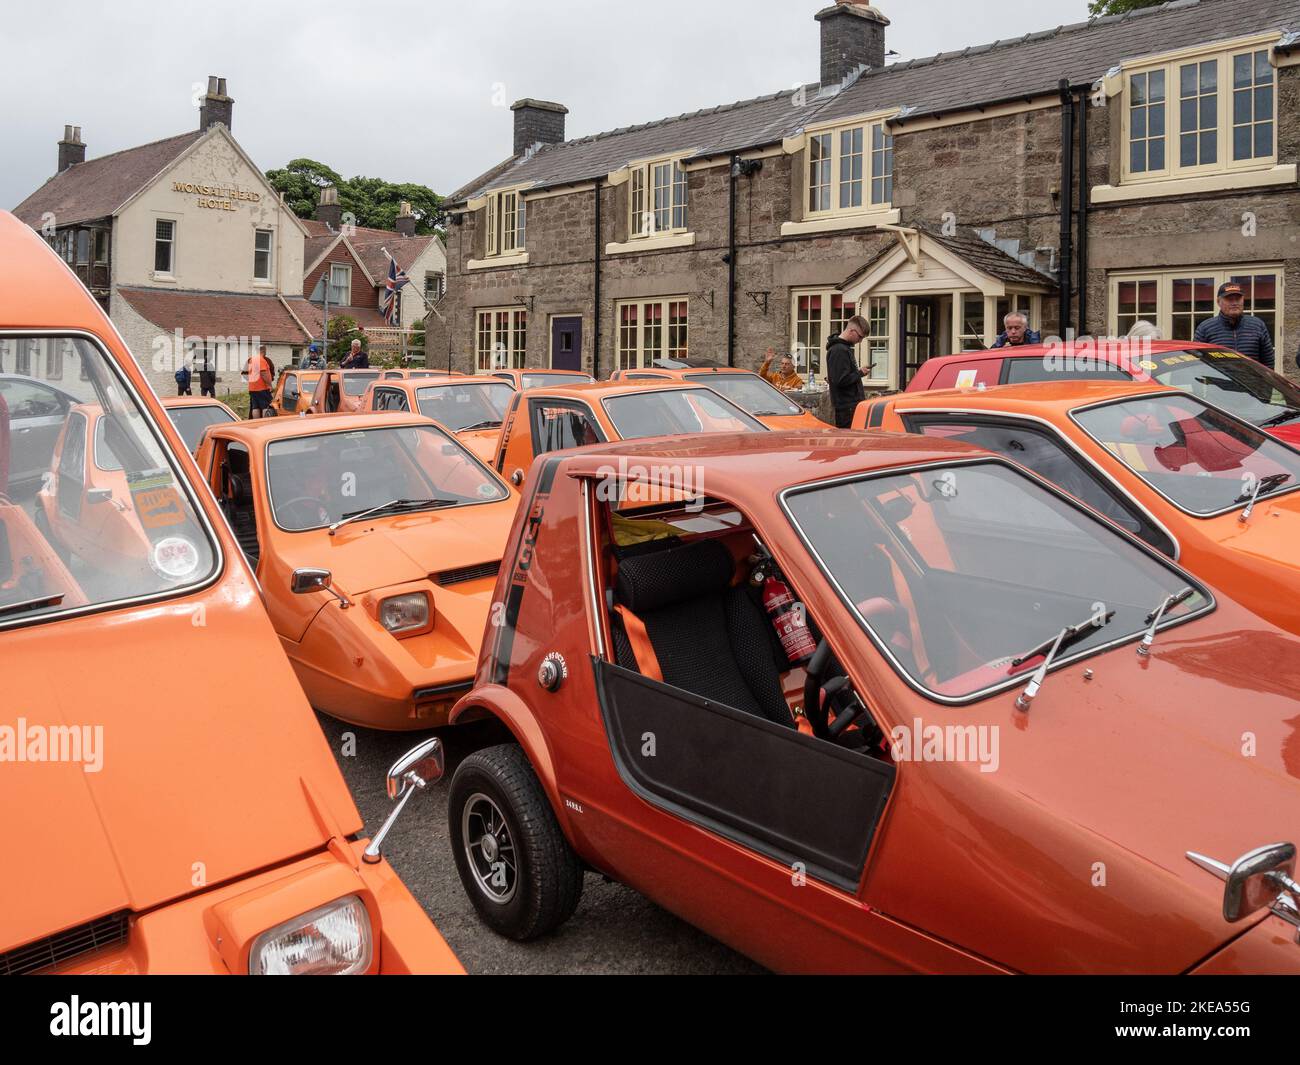 Bond Bug car meet at Monsal Head, Derbyshire, UK; car is a two seat, three wheeler built by Reliant in the 1970s Stock Photo